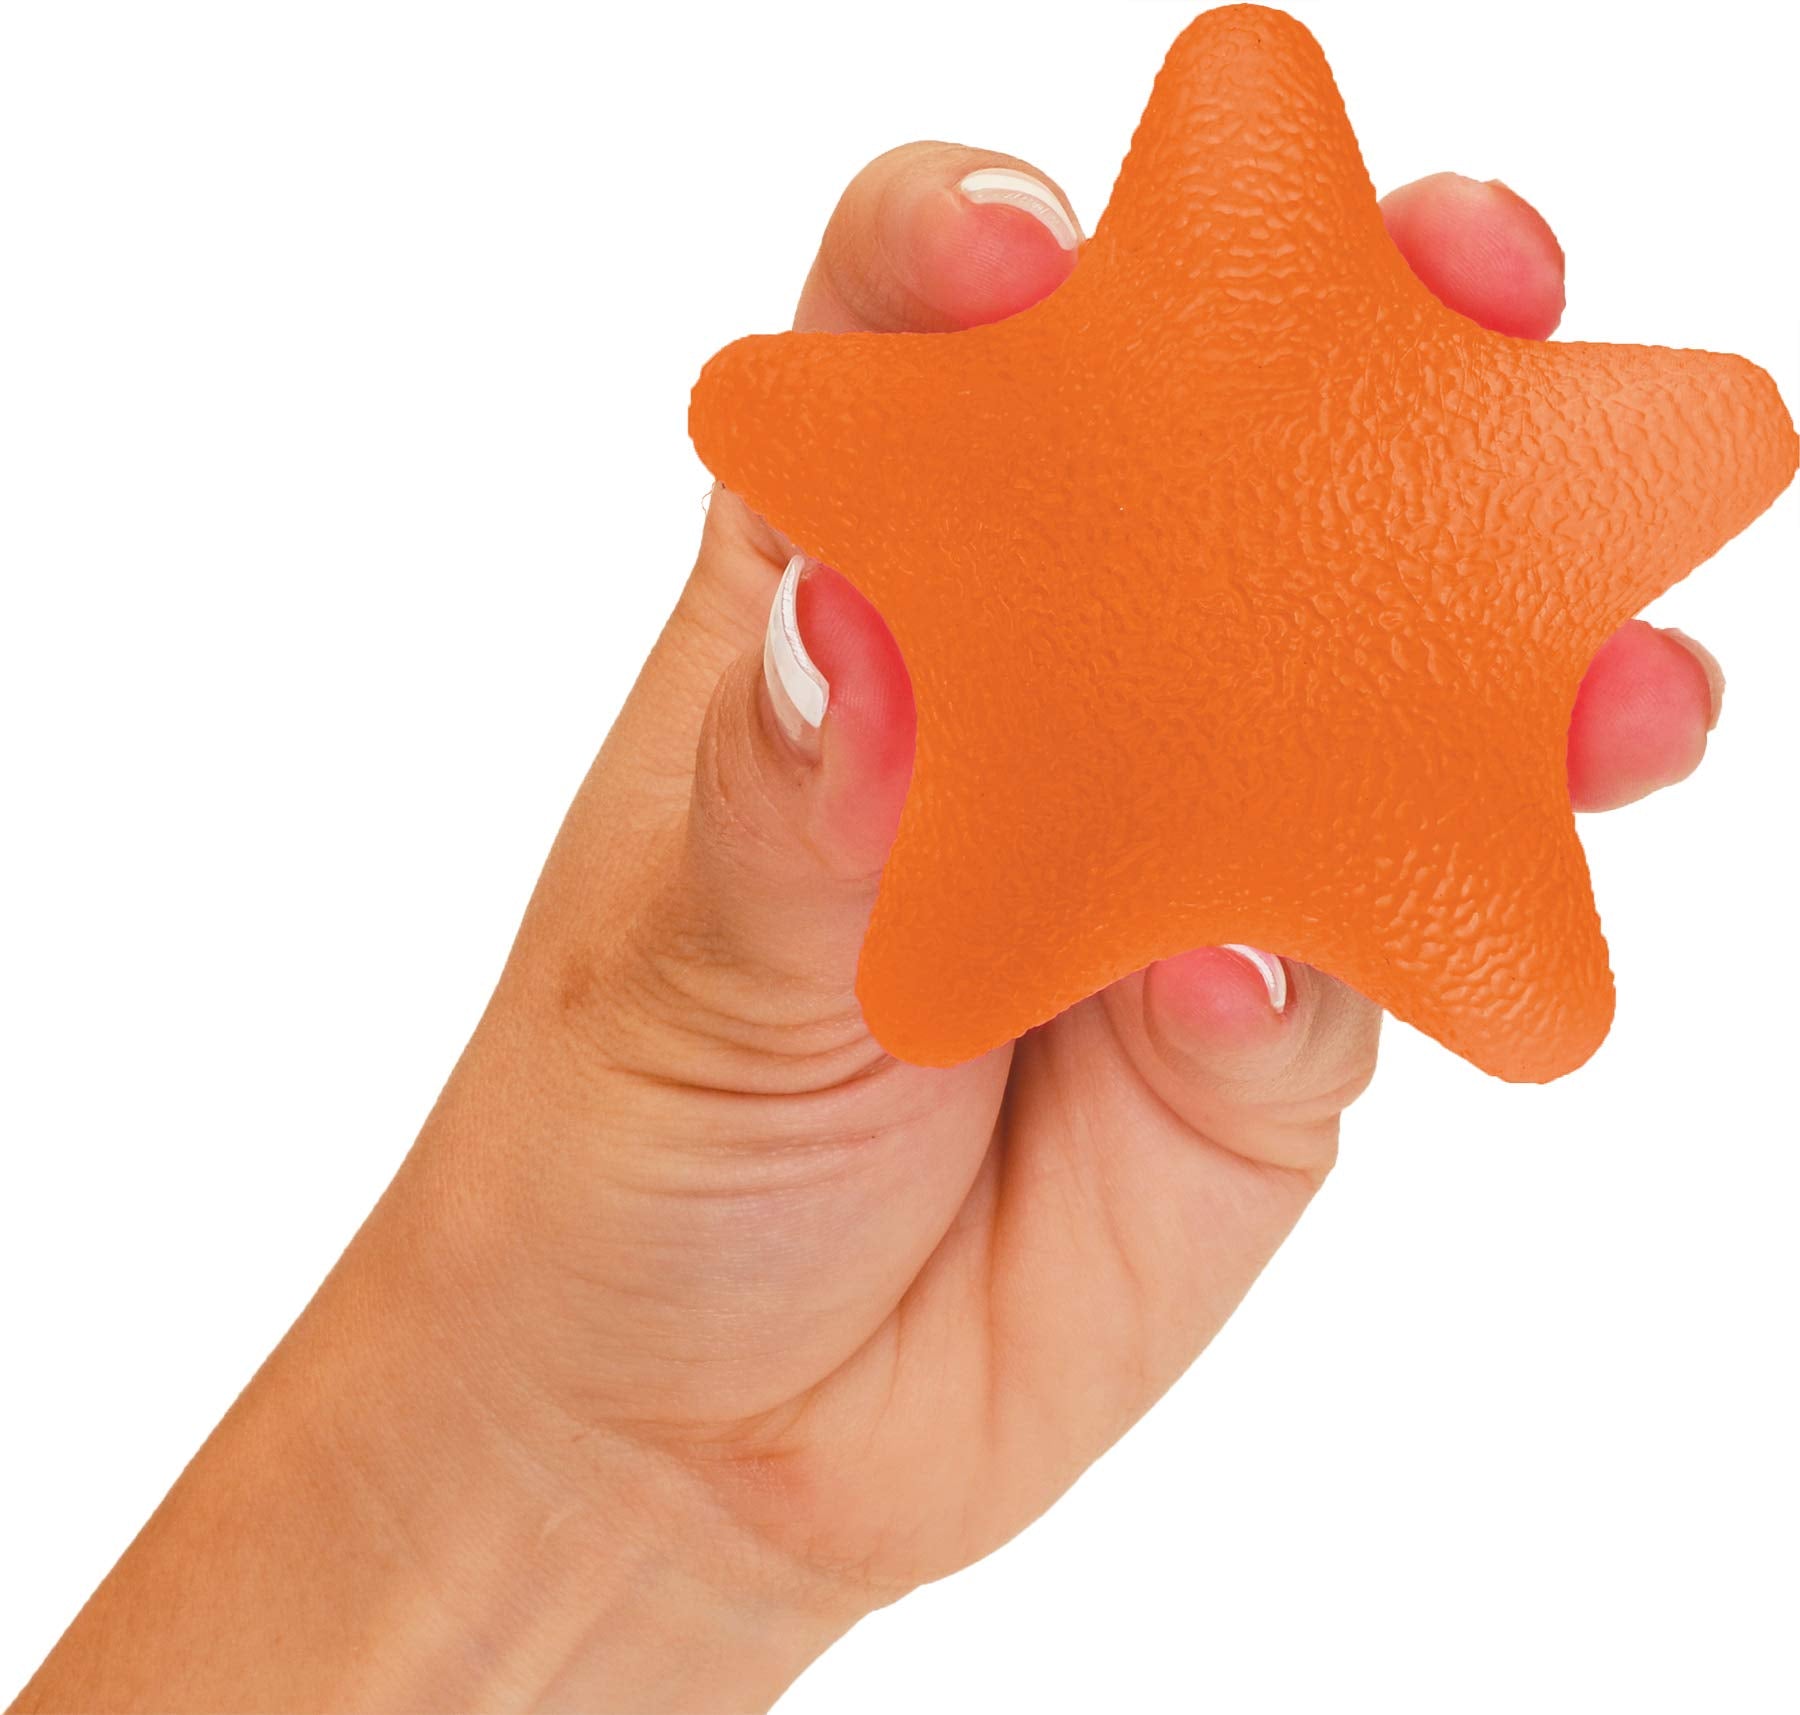 NOVA Hand Exerciser Star, Hand Grip Squeeze Star for Strength, Stress and Recovery, Comes in 3 Resistance Levels - Pink Soft, Orange Medium and Blue Firm